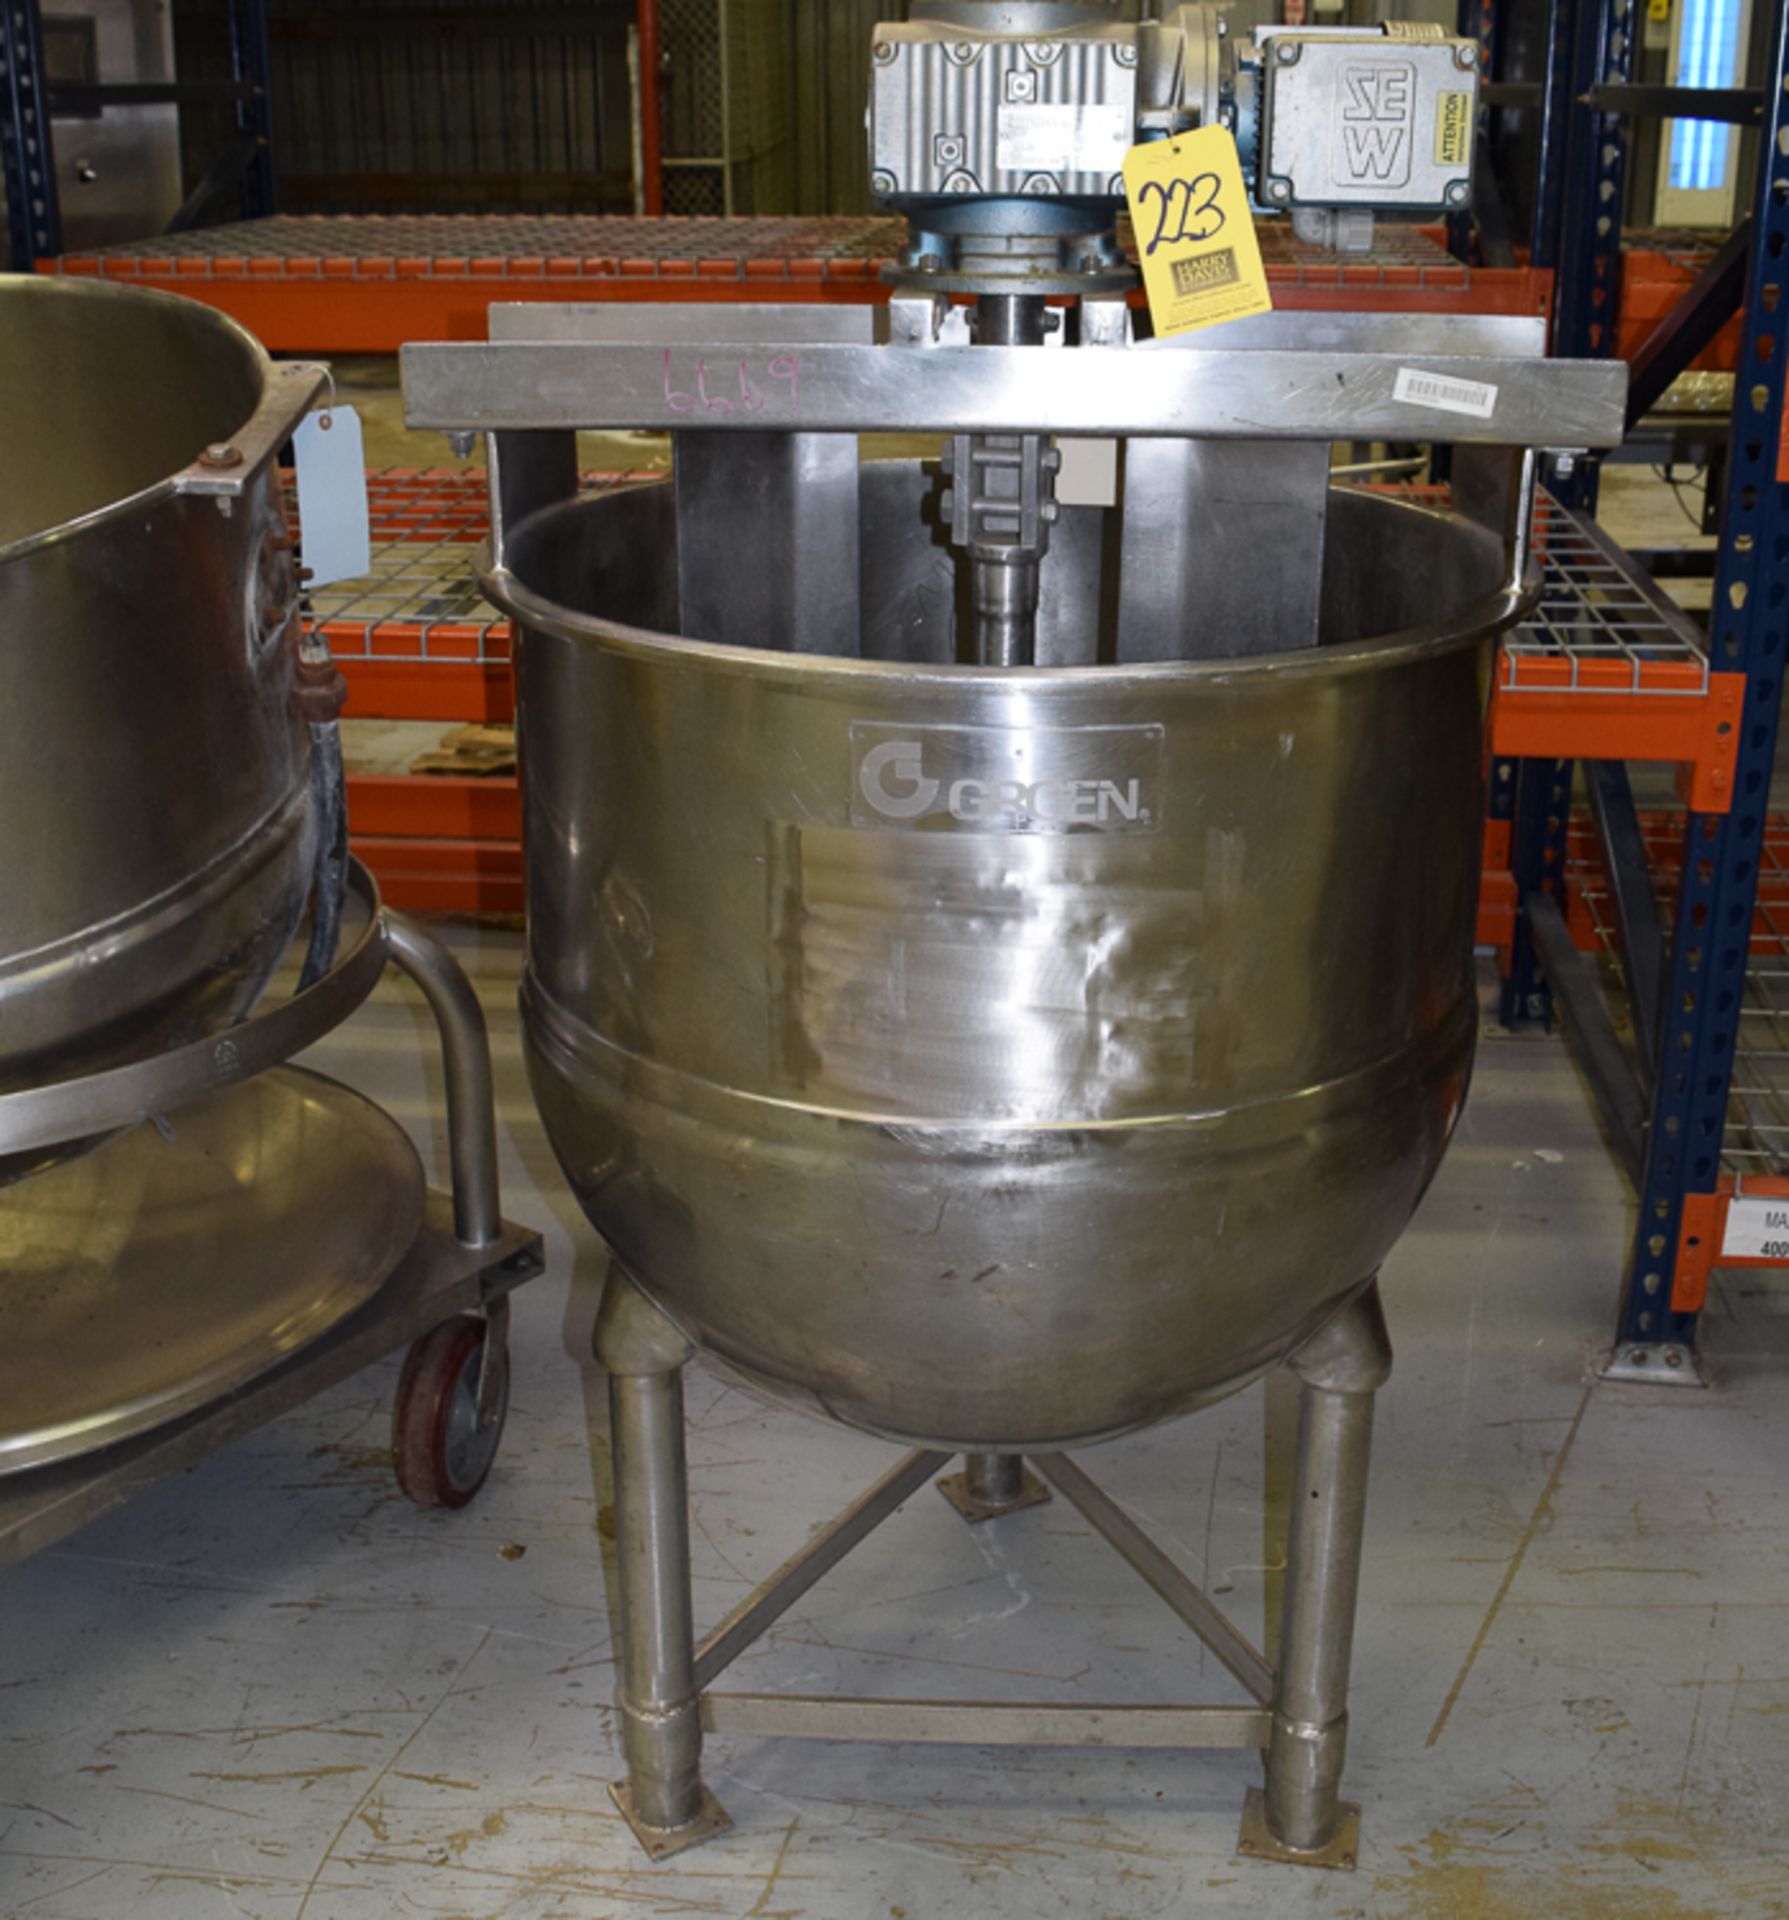 Groen 60 Gallon S/S Jacketed Kettle with Scrape Surface Agitator, Rigging Fee: Please Contact US